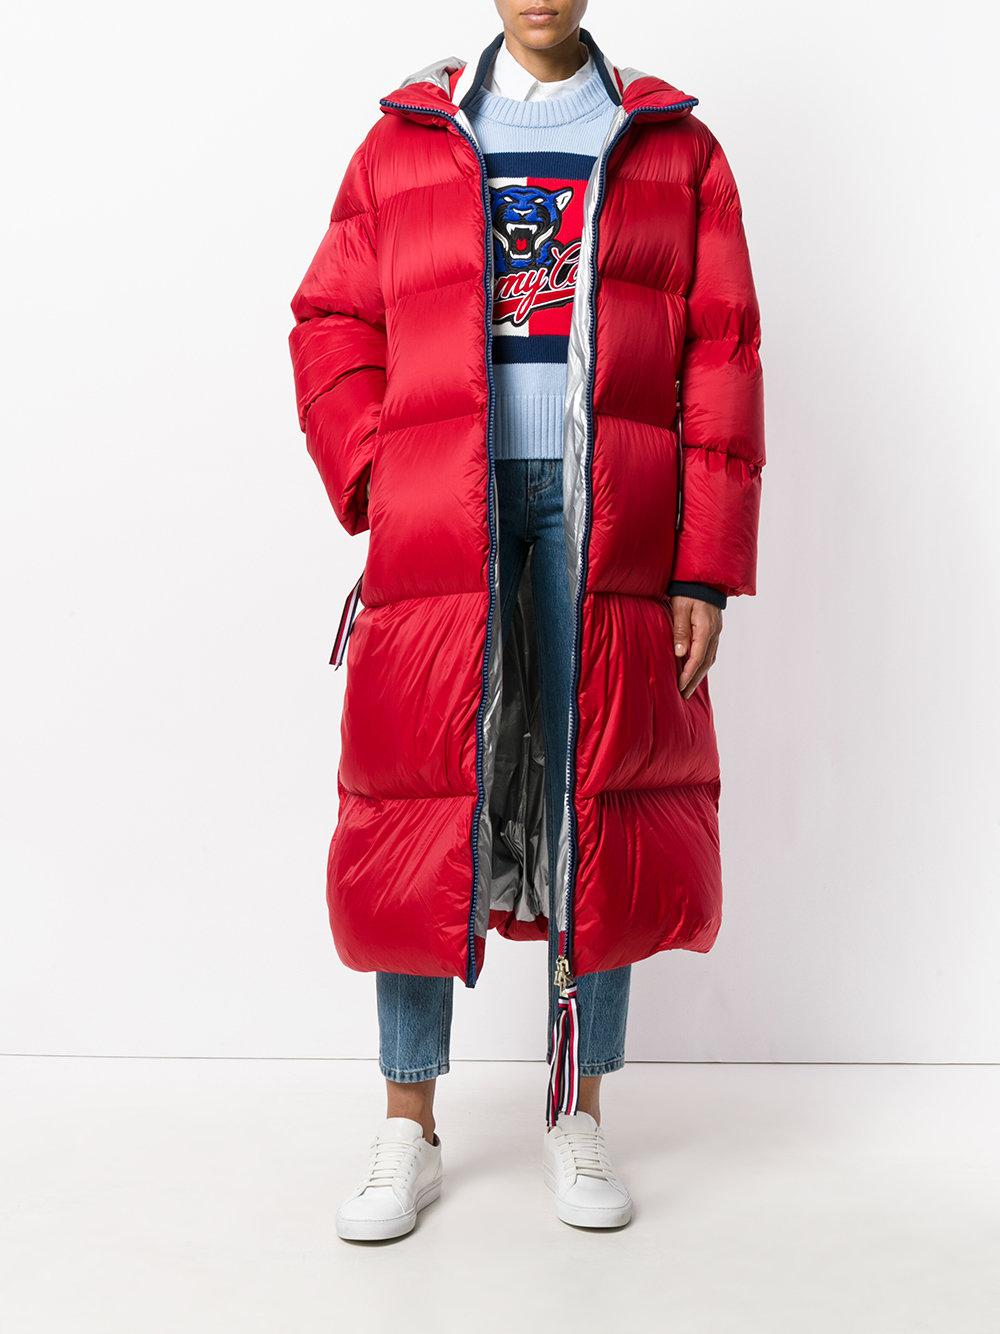 Tommy Hilfiger Goose Icon Oversized Down Coat in Red - Lyst